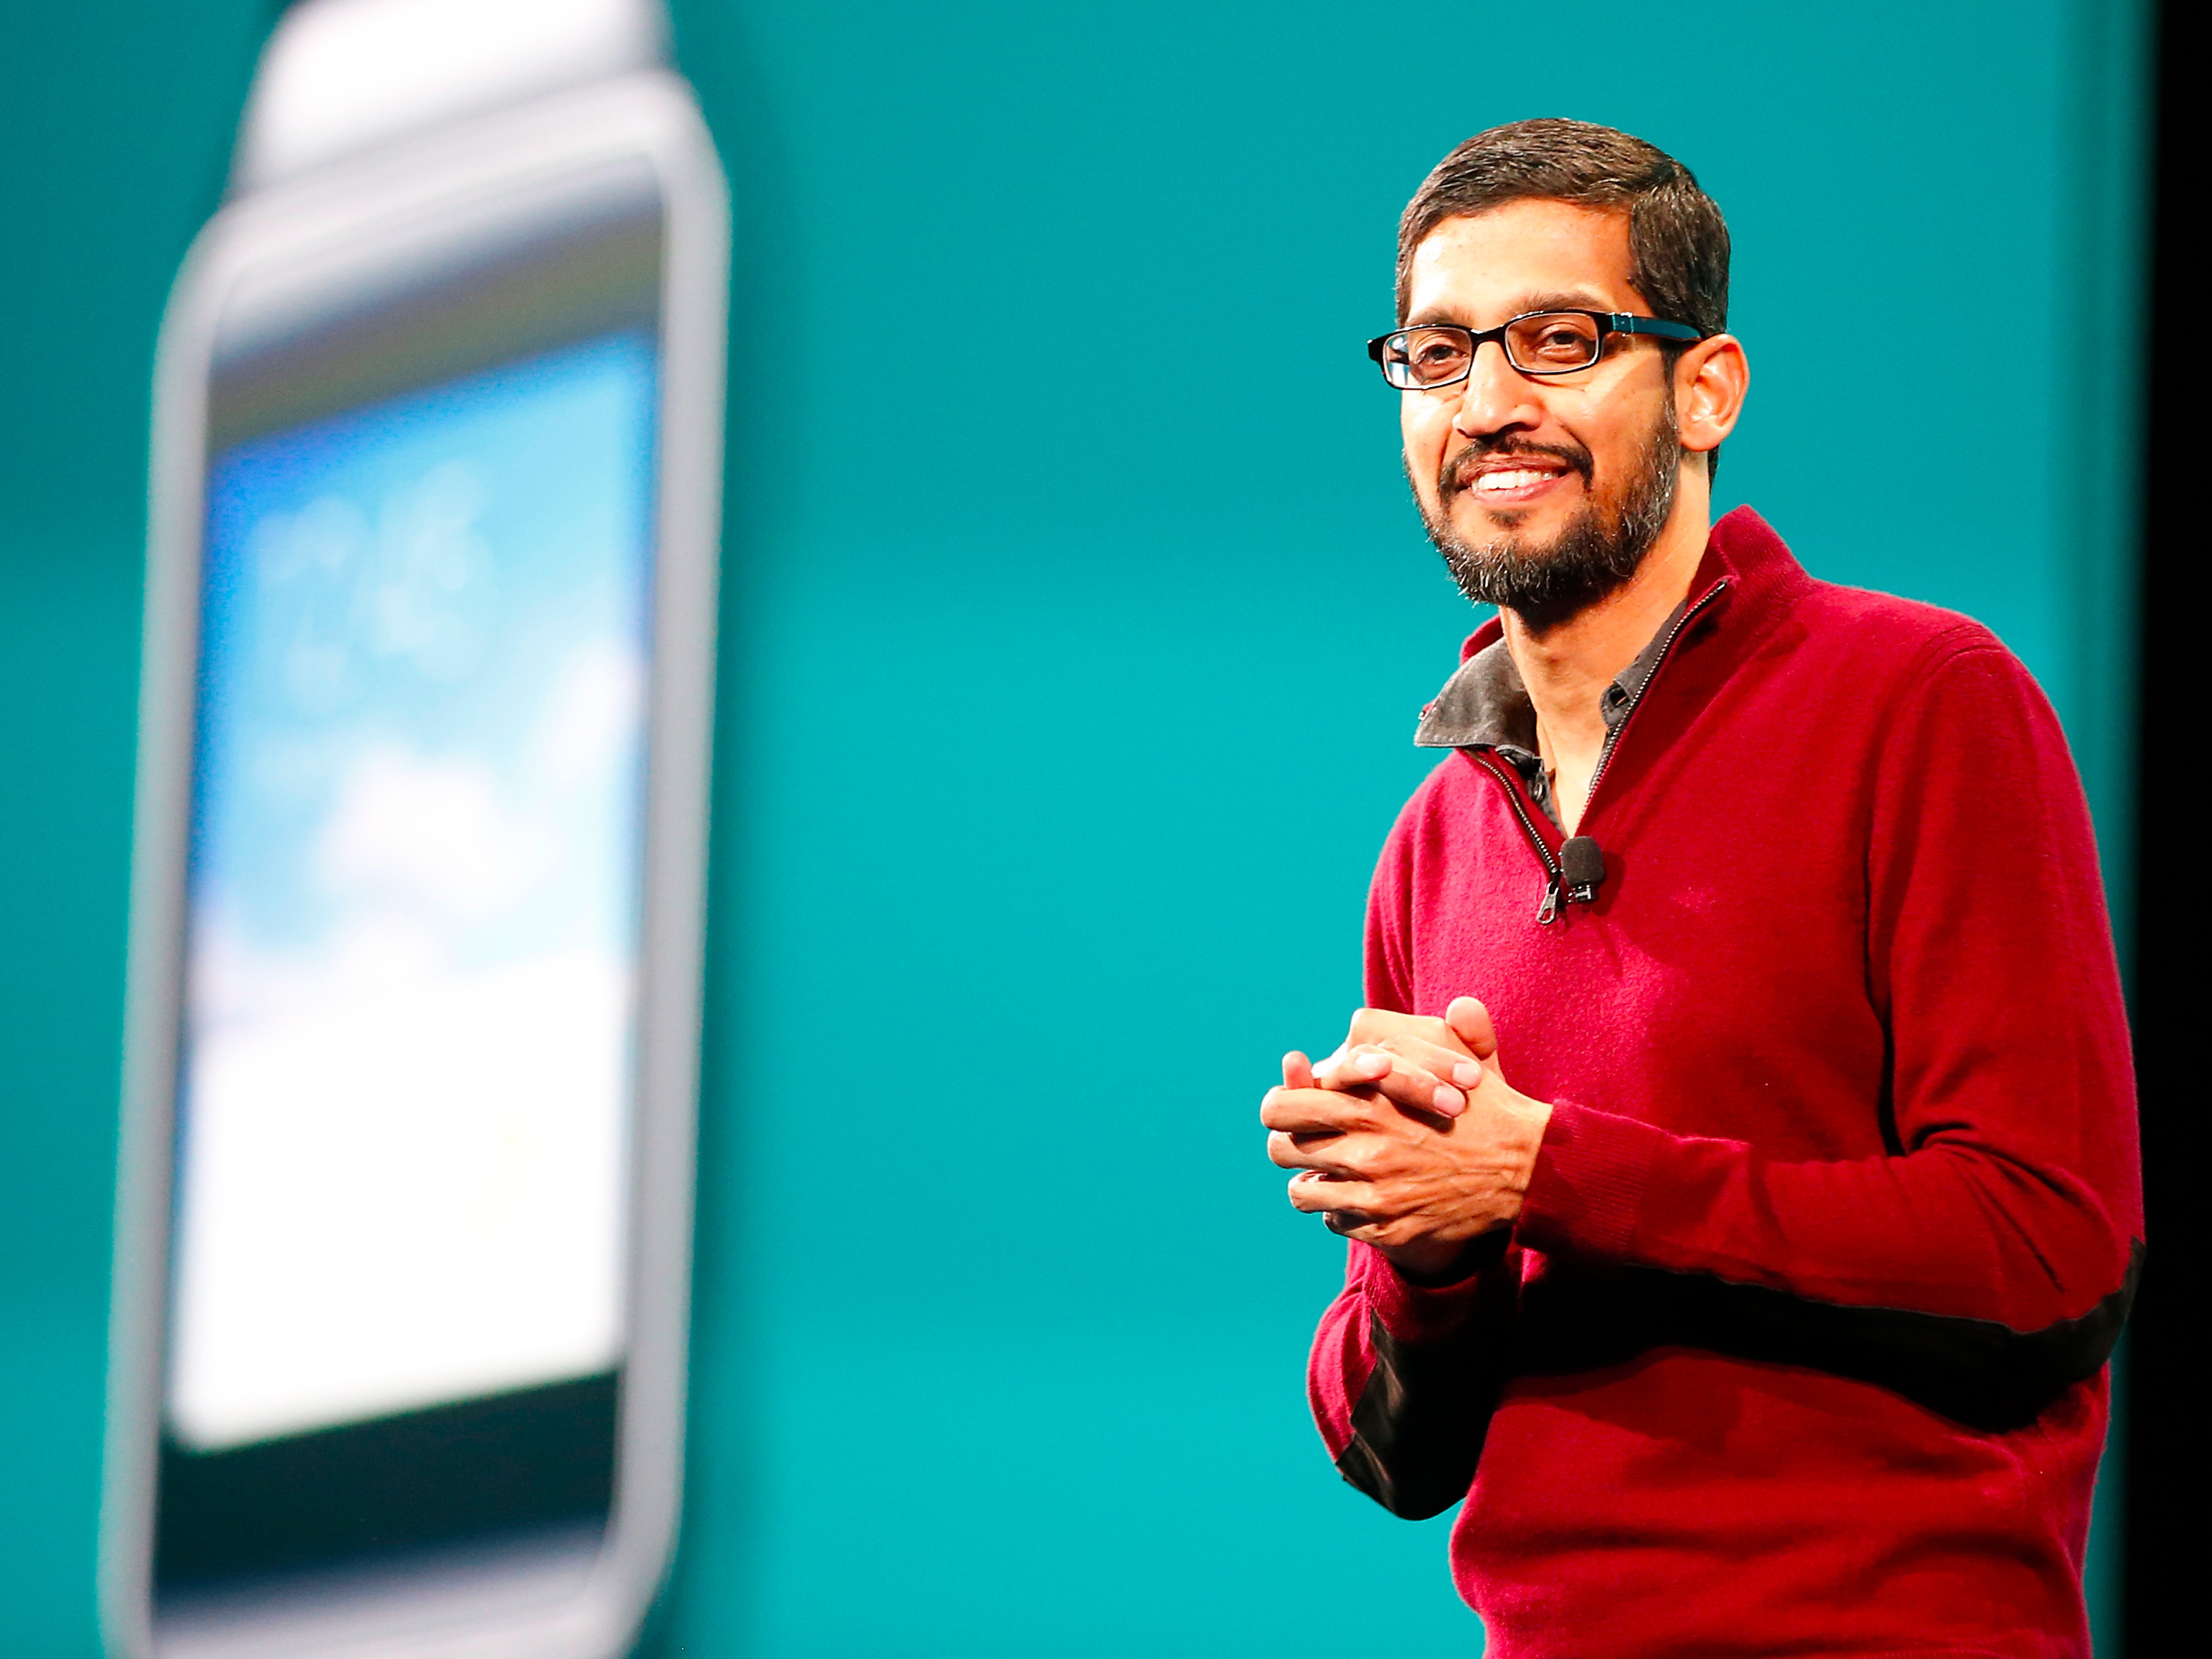 This anecdote about Google's CEO missing a meeting shows what